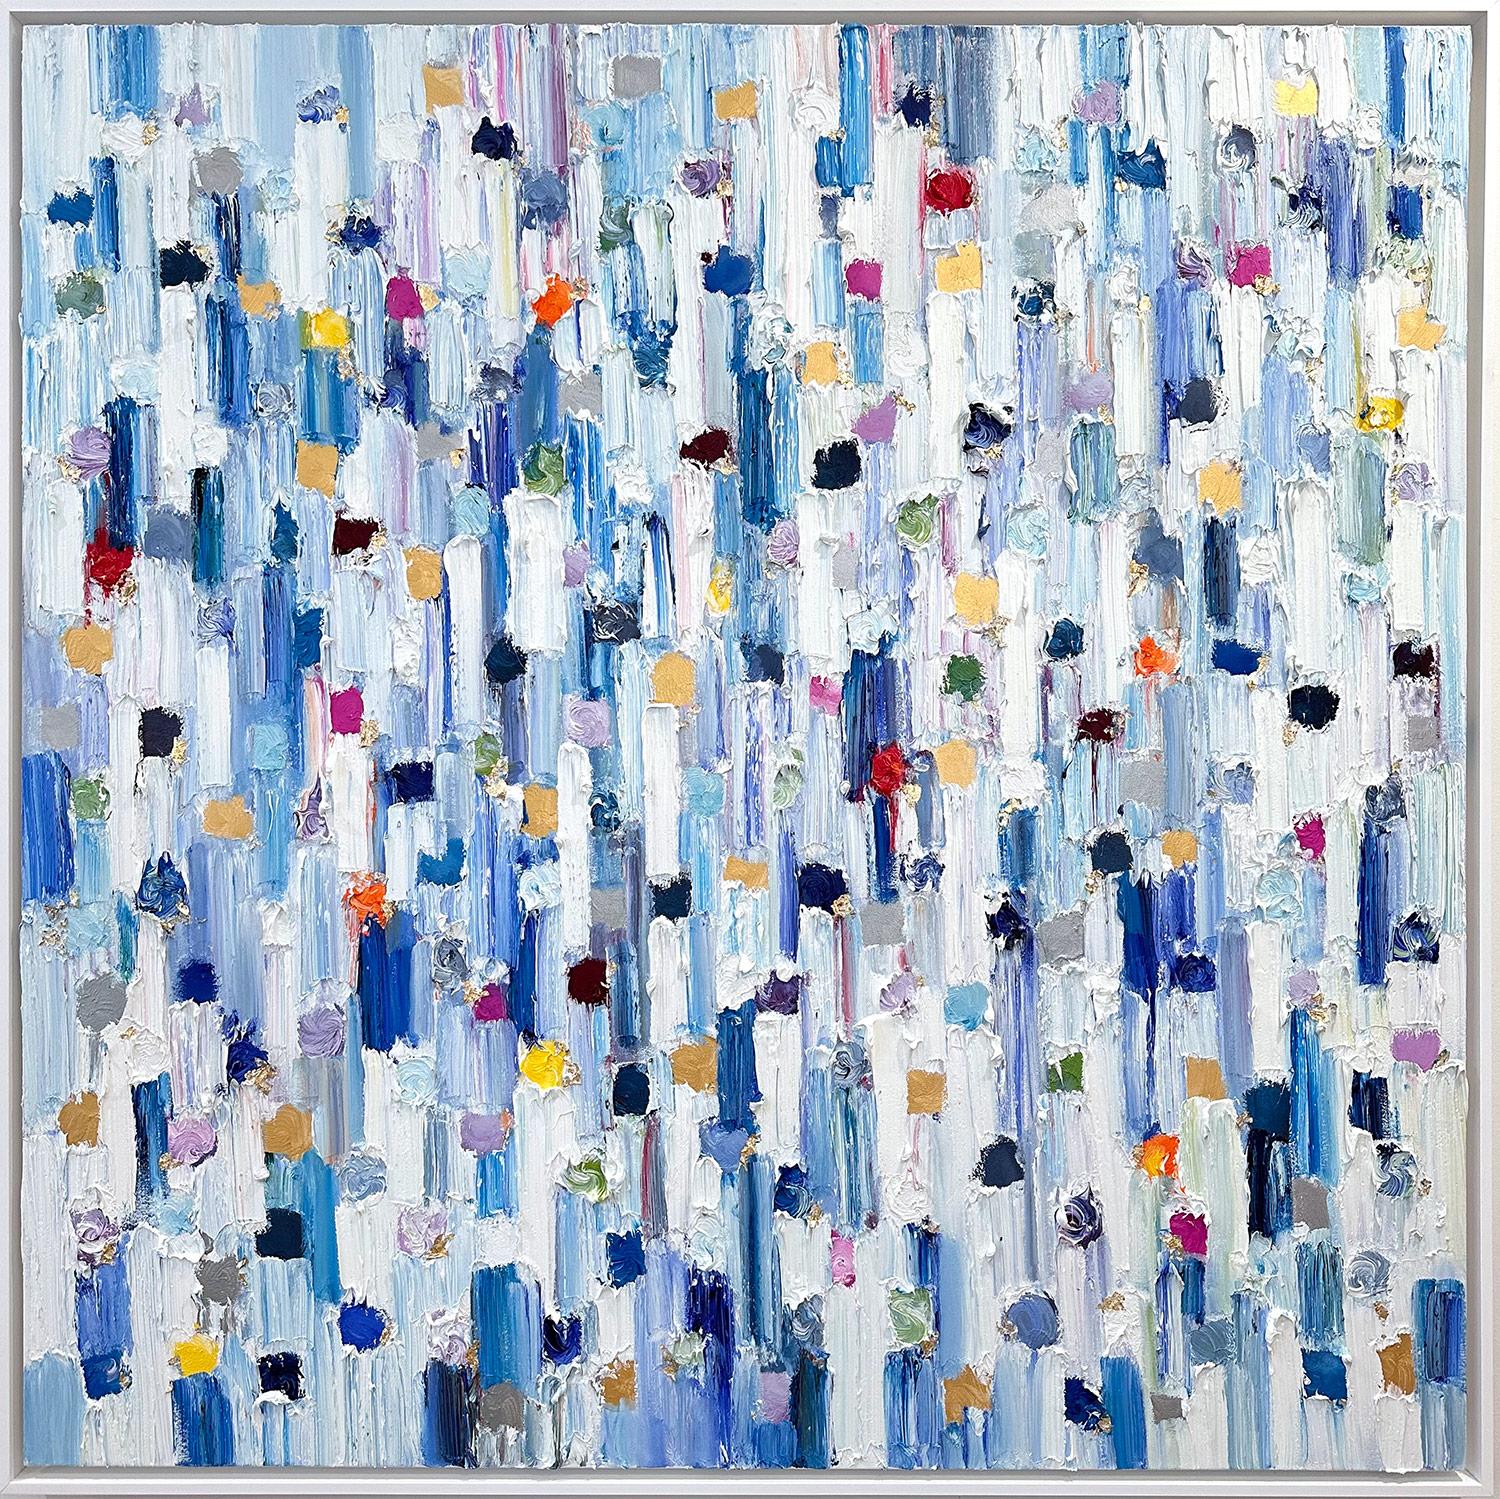 Cindy Shaoul Abstract Painting - "Dripping Dots - St. Barths" Contemporary Oil Painting on Canvas Framed